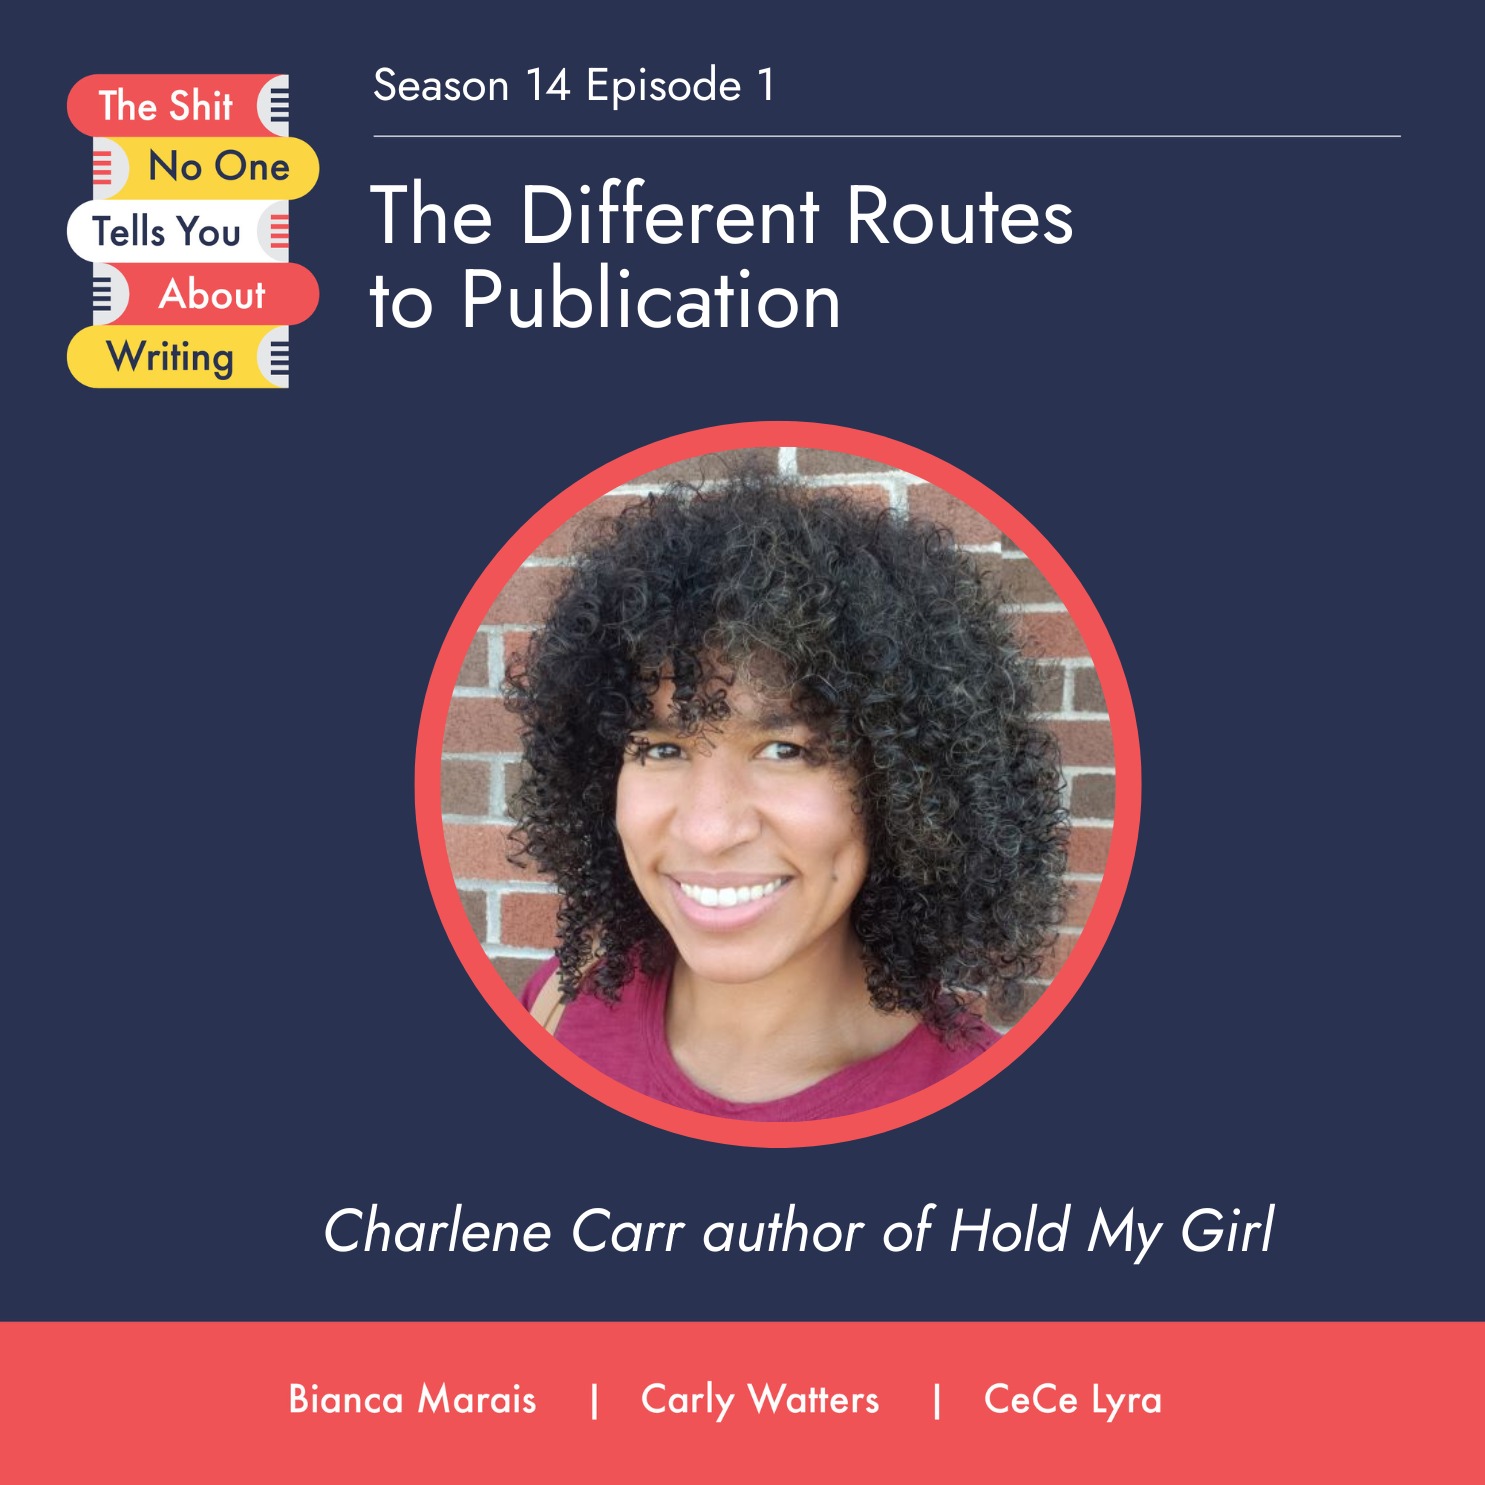 The Different Routes to Publication